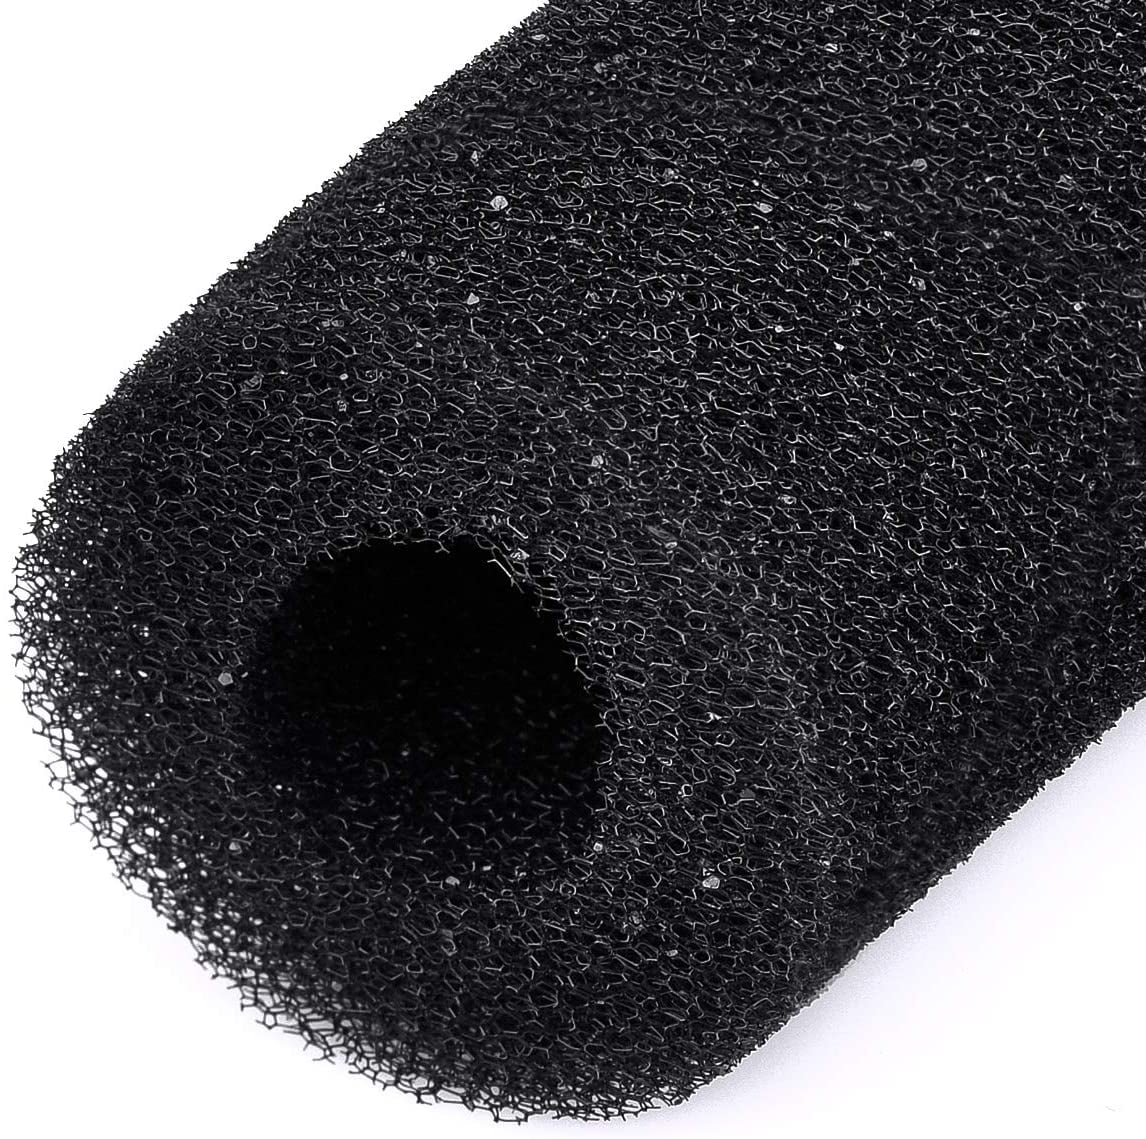 S Youngy 5 Pieces Sponge Aquarium Filter Protector Cover for Fish Tank Inlet Pond Black Foam 